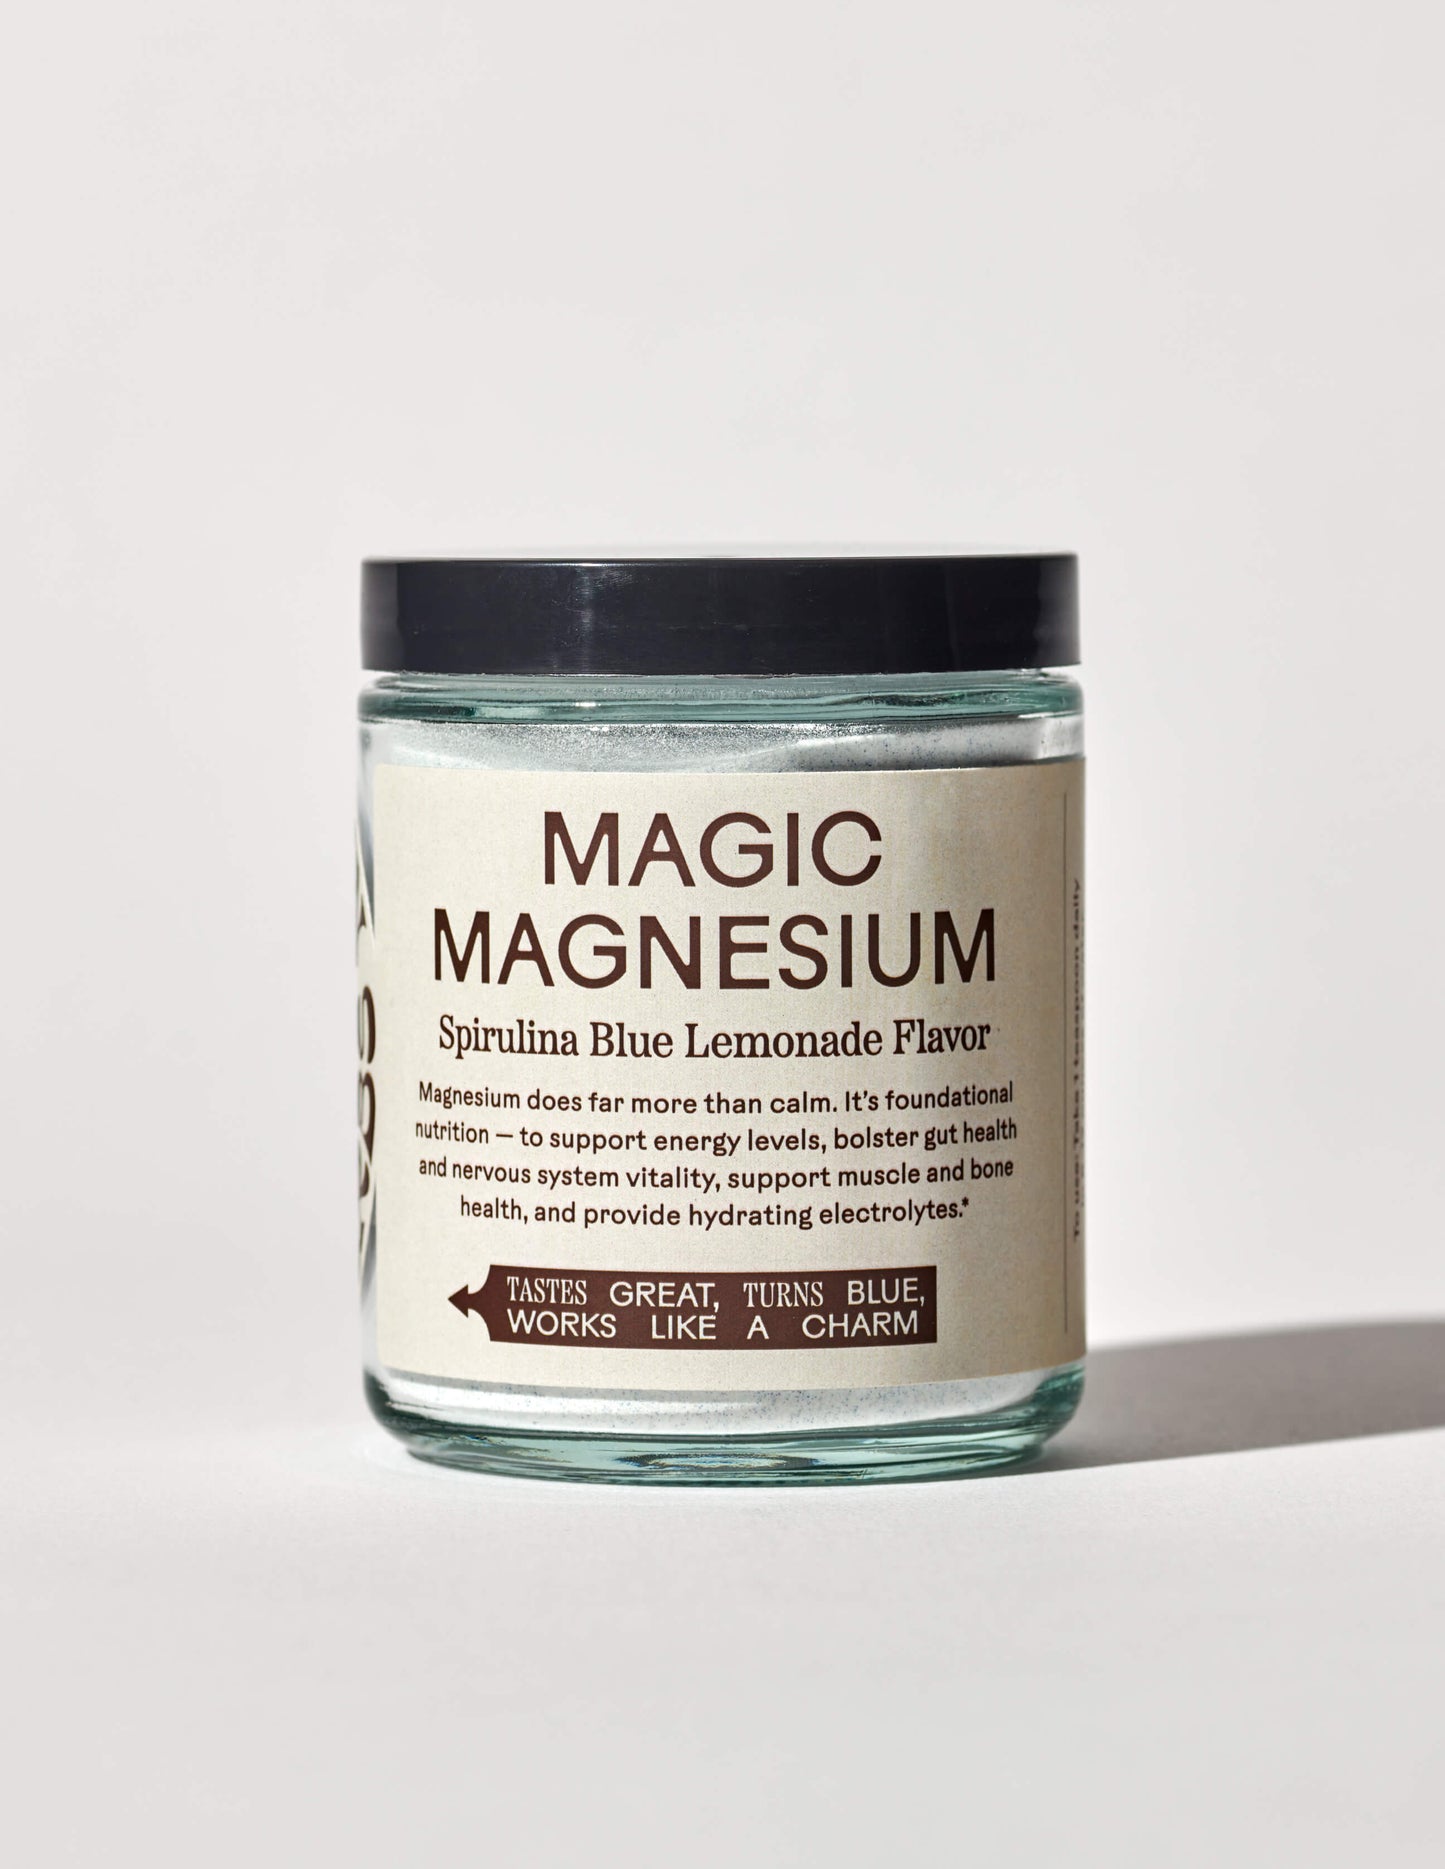 Magic Magnesium, by Wooden Spoon Herbs